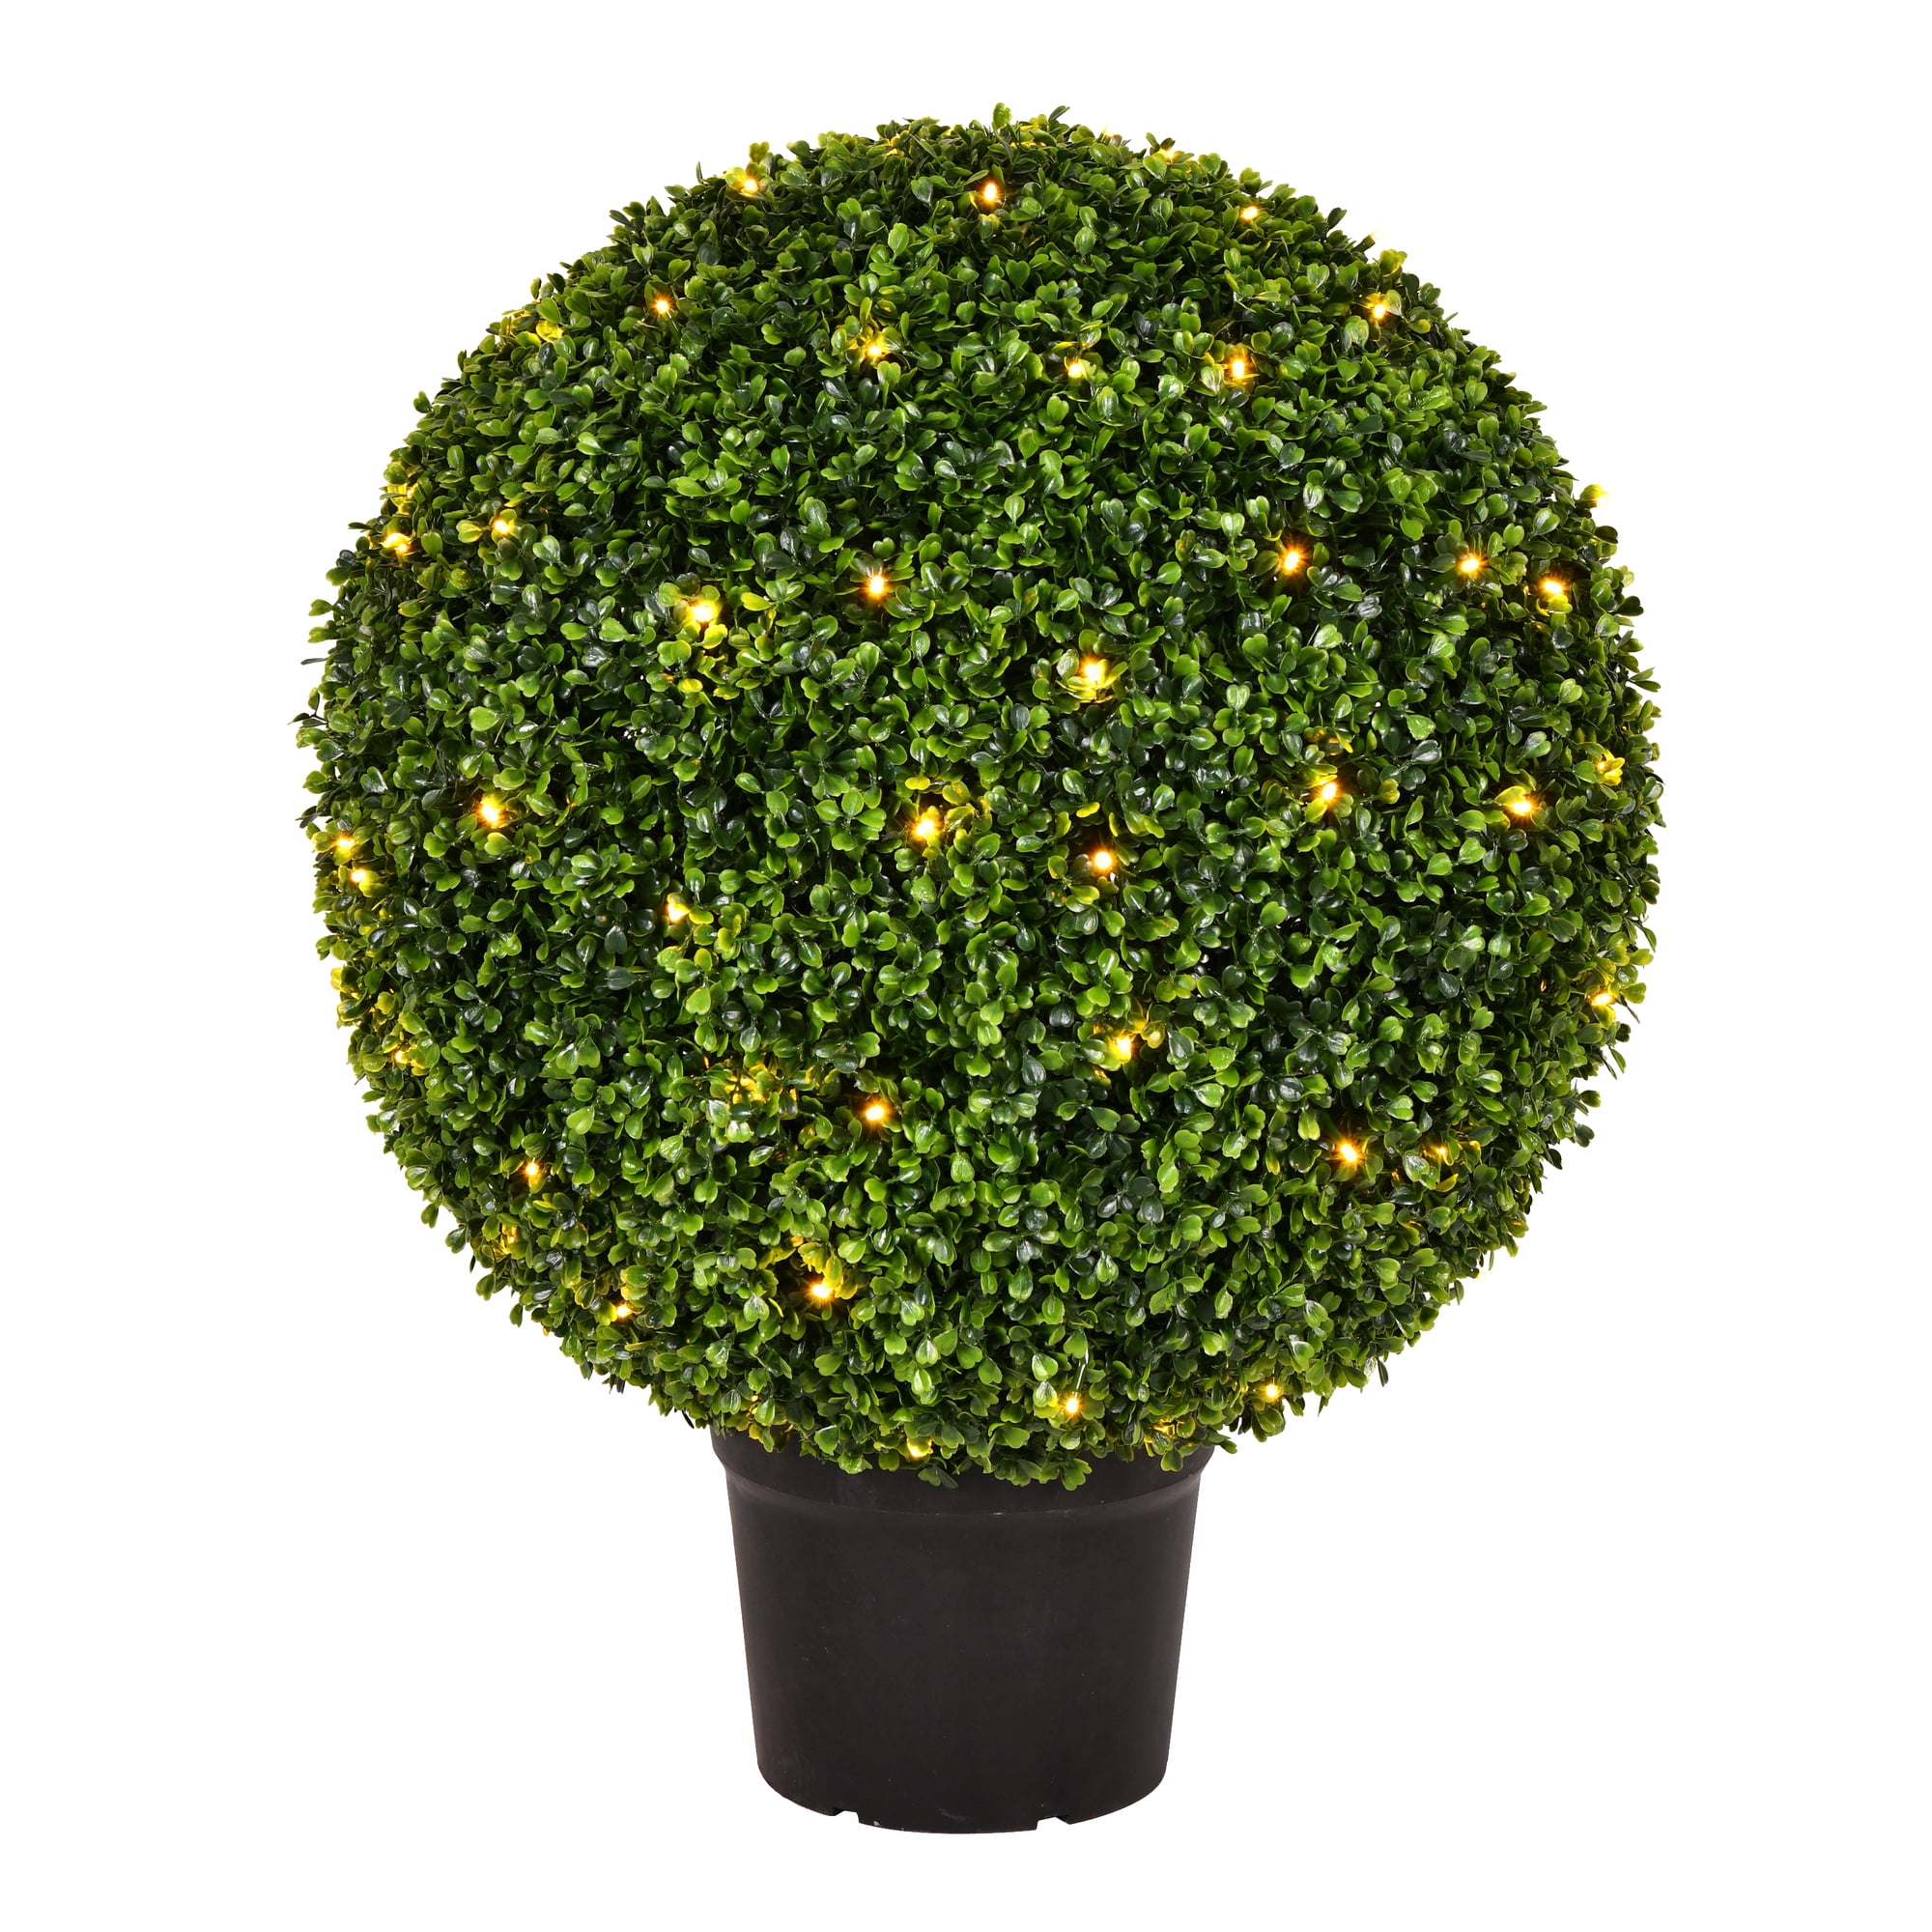 TP171324 Details about   Vickerman 24" Boxwood Ball In Pot UV Case of 1 